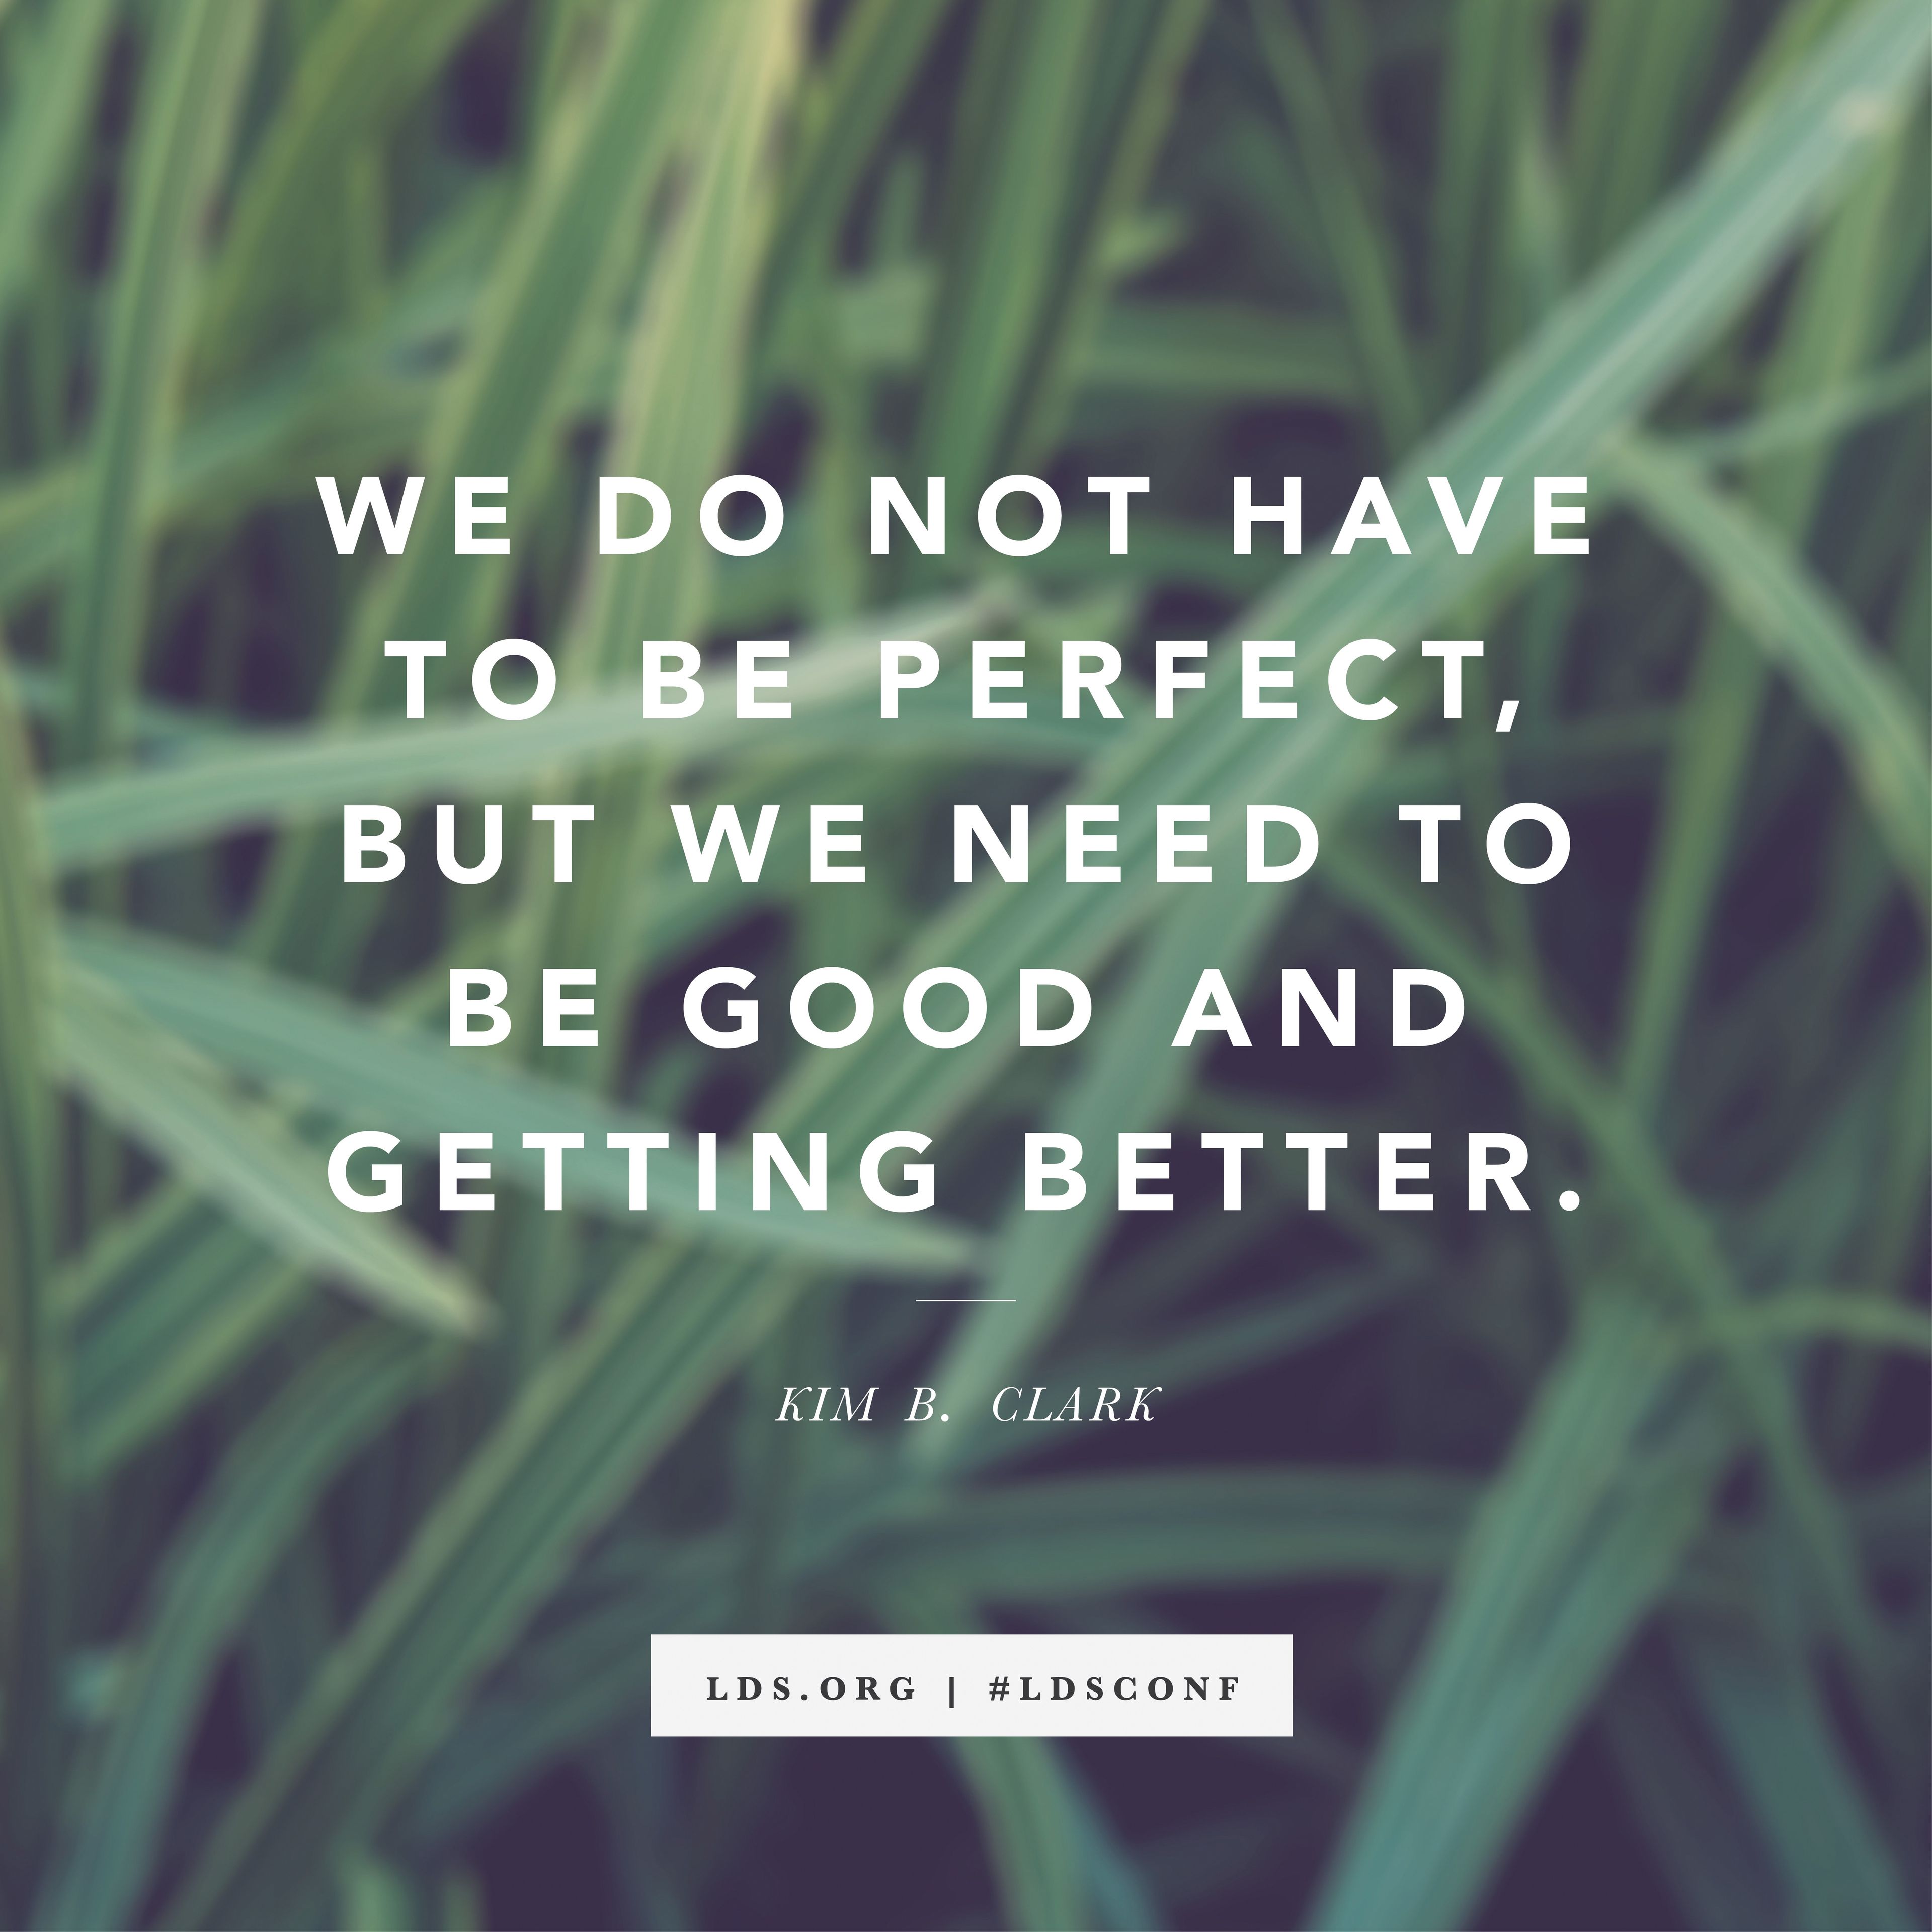 “We do not have to be perfect, but we need to be good and getting better.” —Elder Kim B. Clark, “Eyes to See and Ears to Hear”